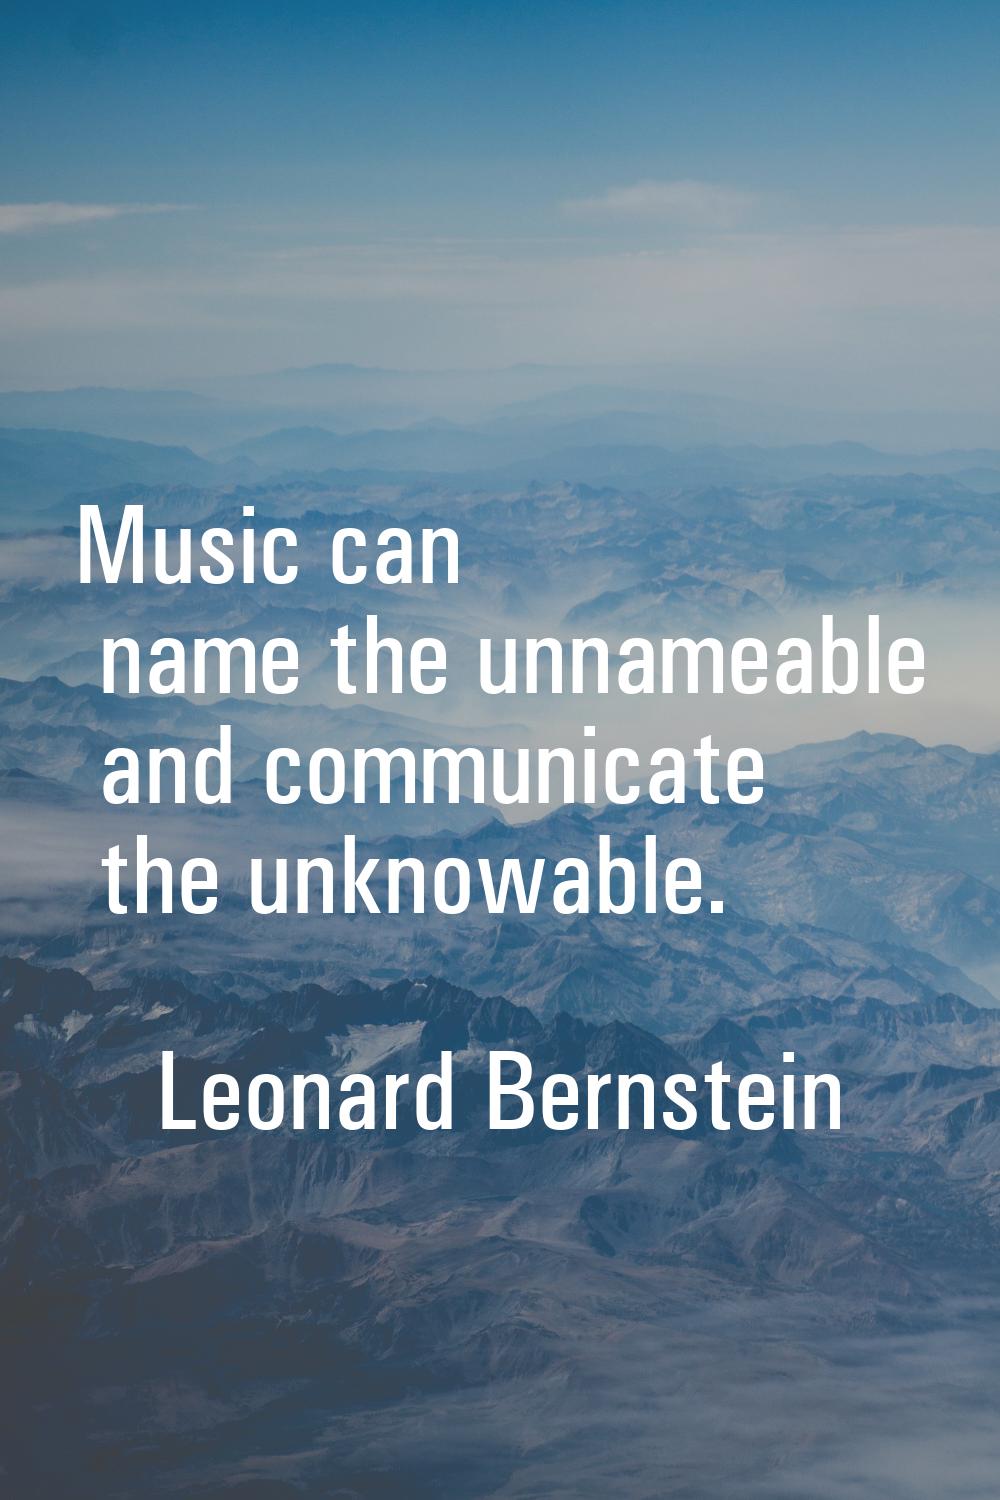 Music can name the unnameable and communicate the unknowable.